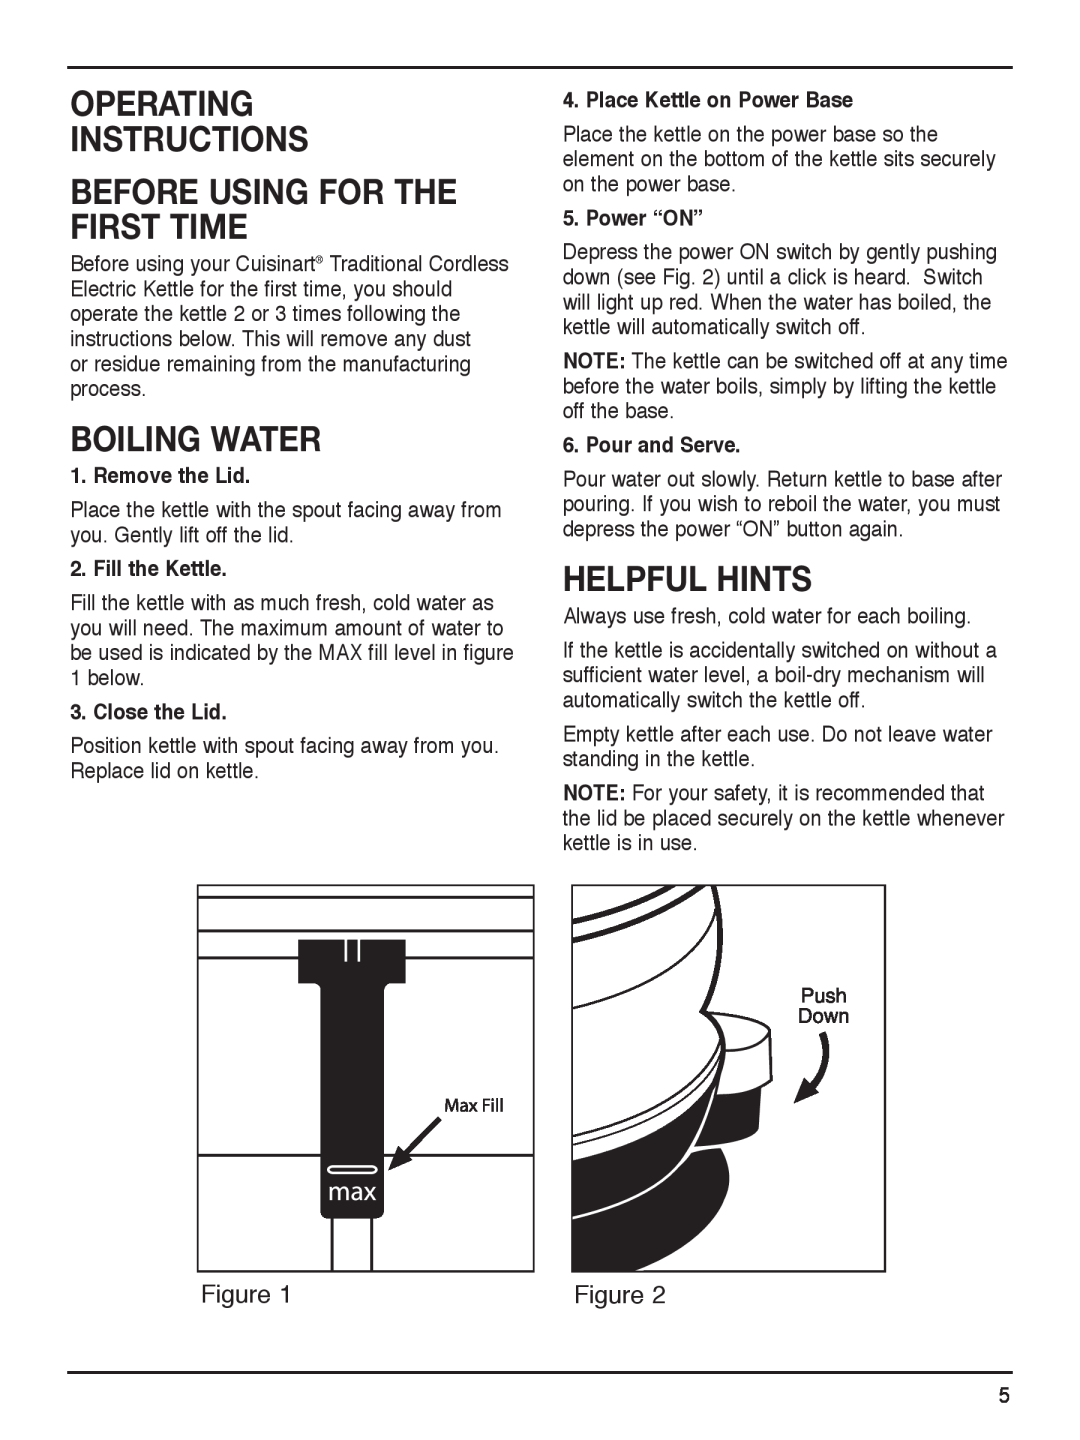 Cuisinart RK-17 manual Operating Instructions Before Using For The First Time, Boiling Water, Helpful Hints, Remove the Lid 